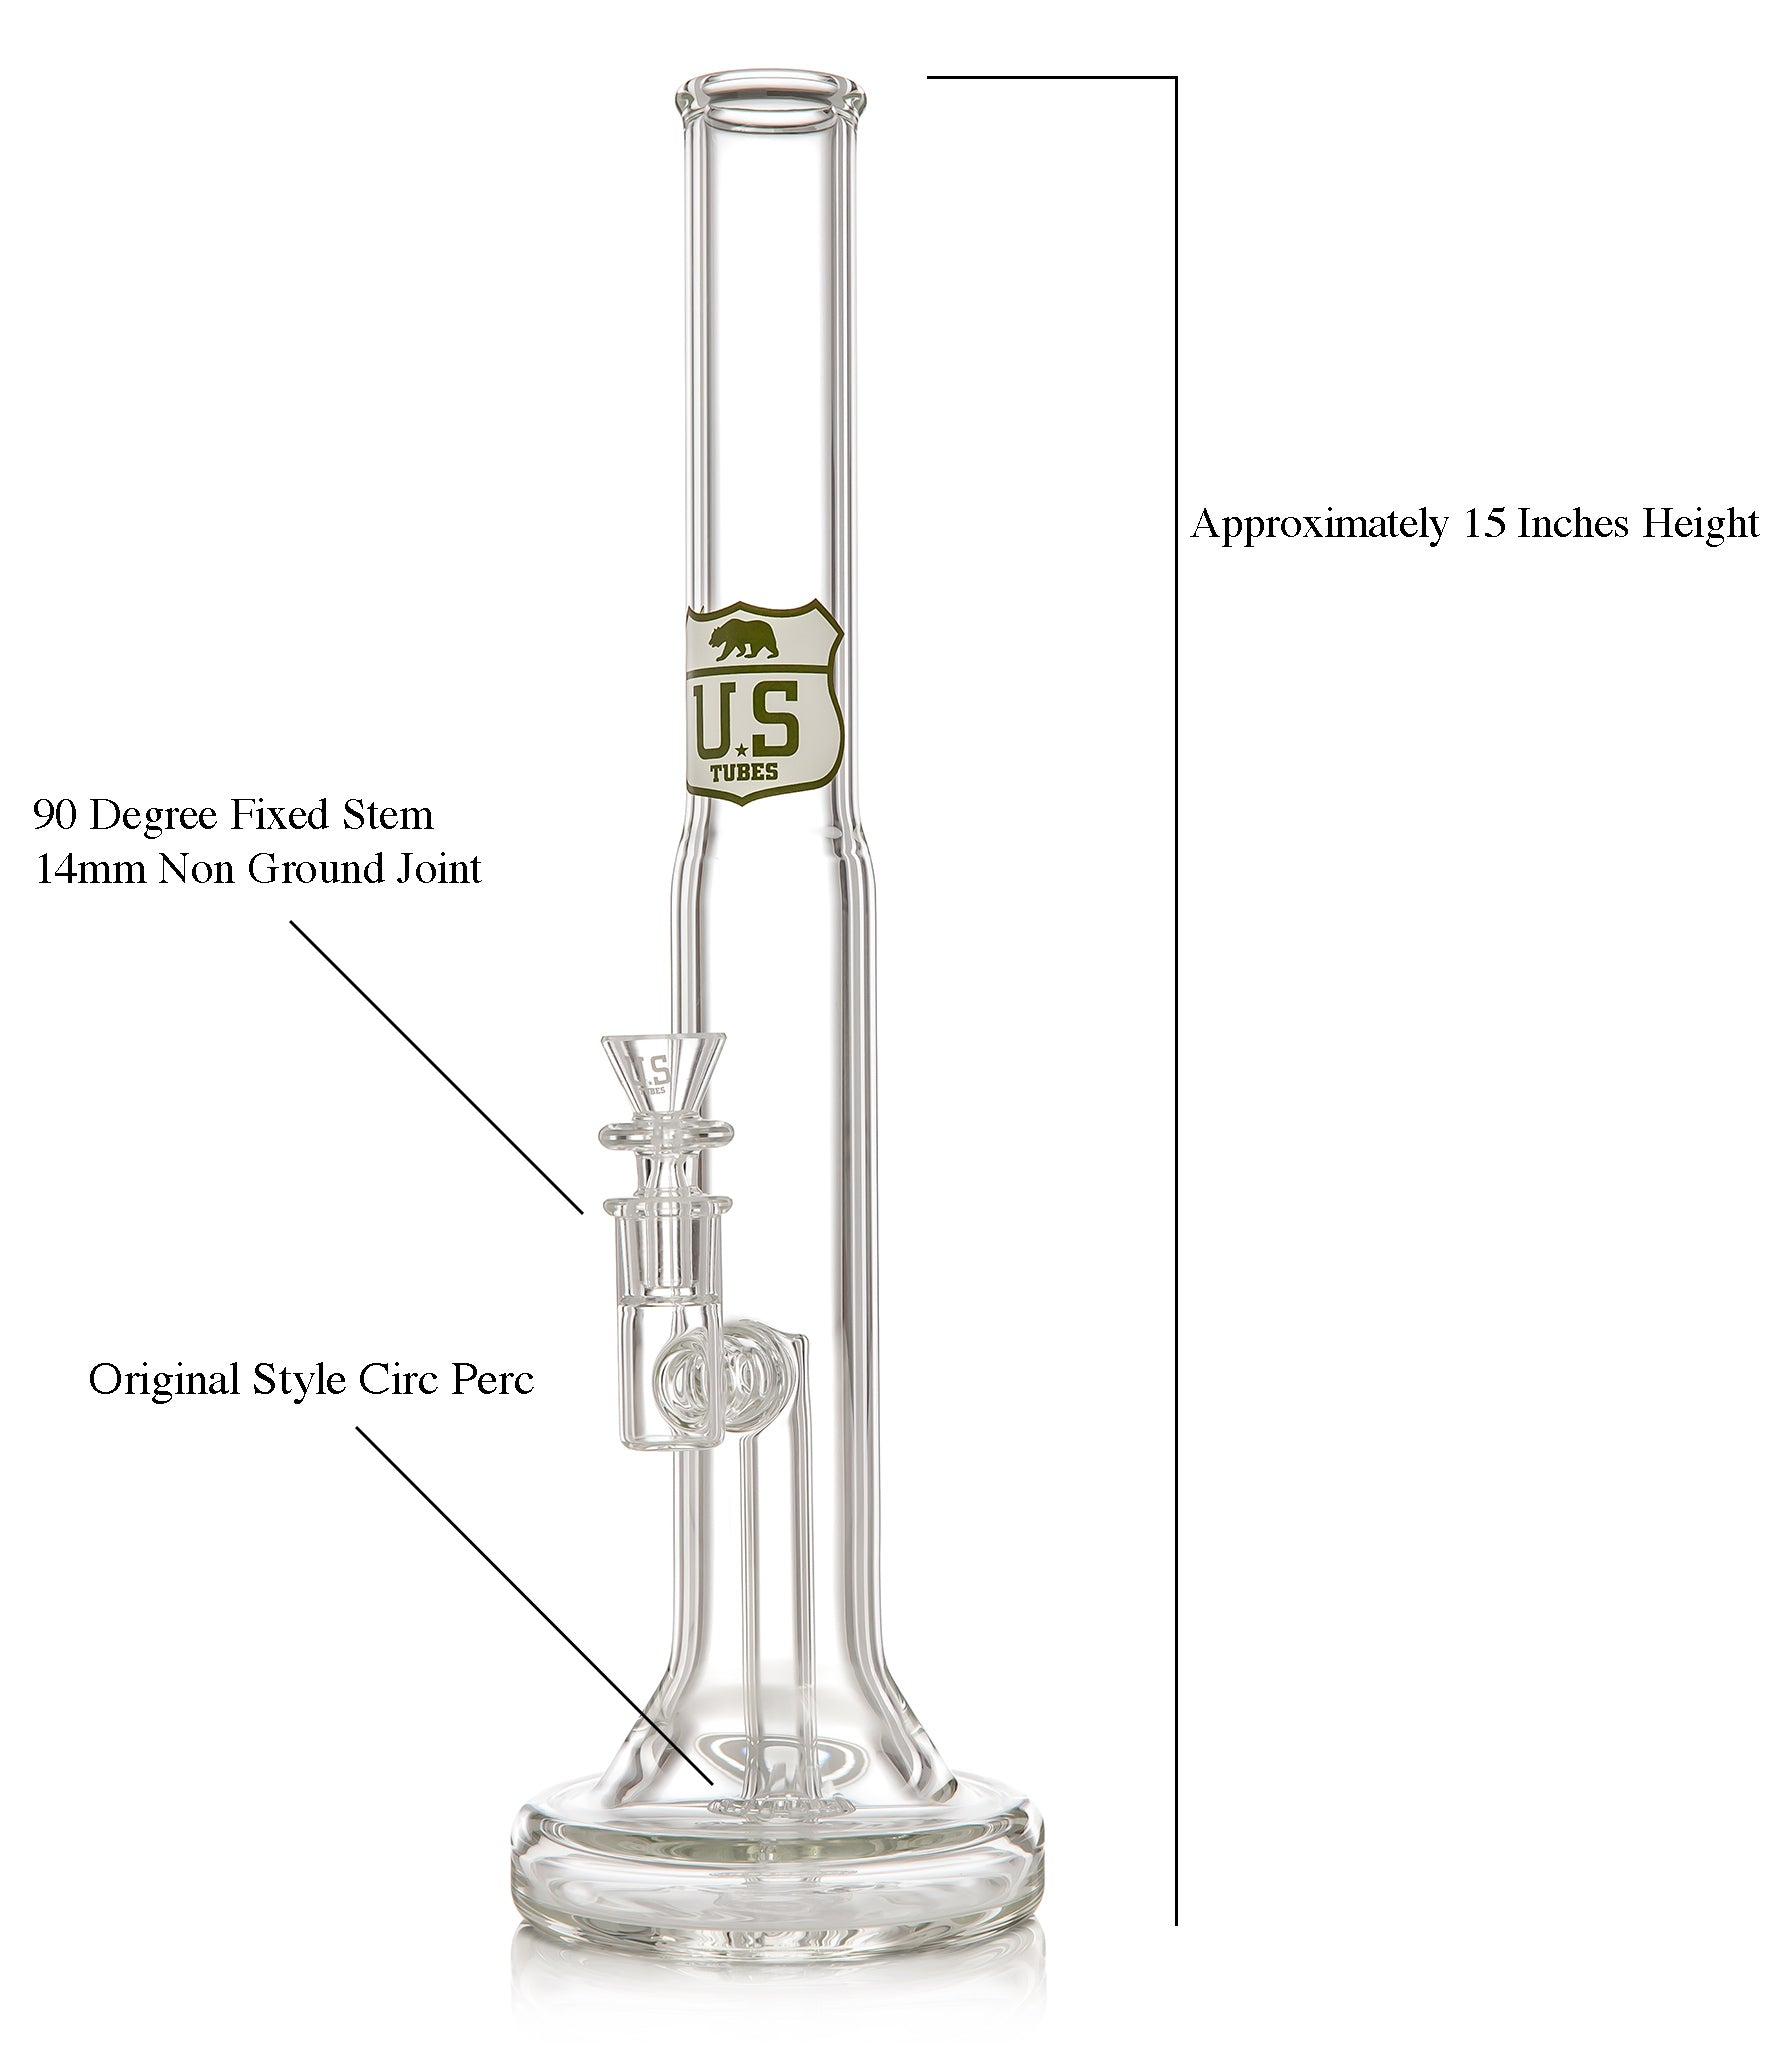 Hybrid Fixed Stem Circ Tube with Product Specs: Approximately 15 Inches Height, 14mm 90 Degree Fixed Stem, Original Style Circ Perc